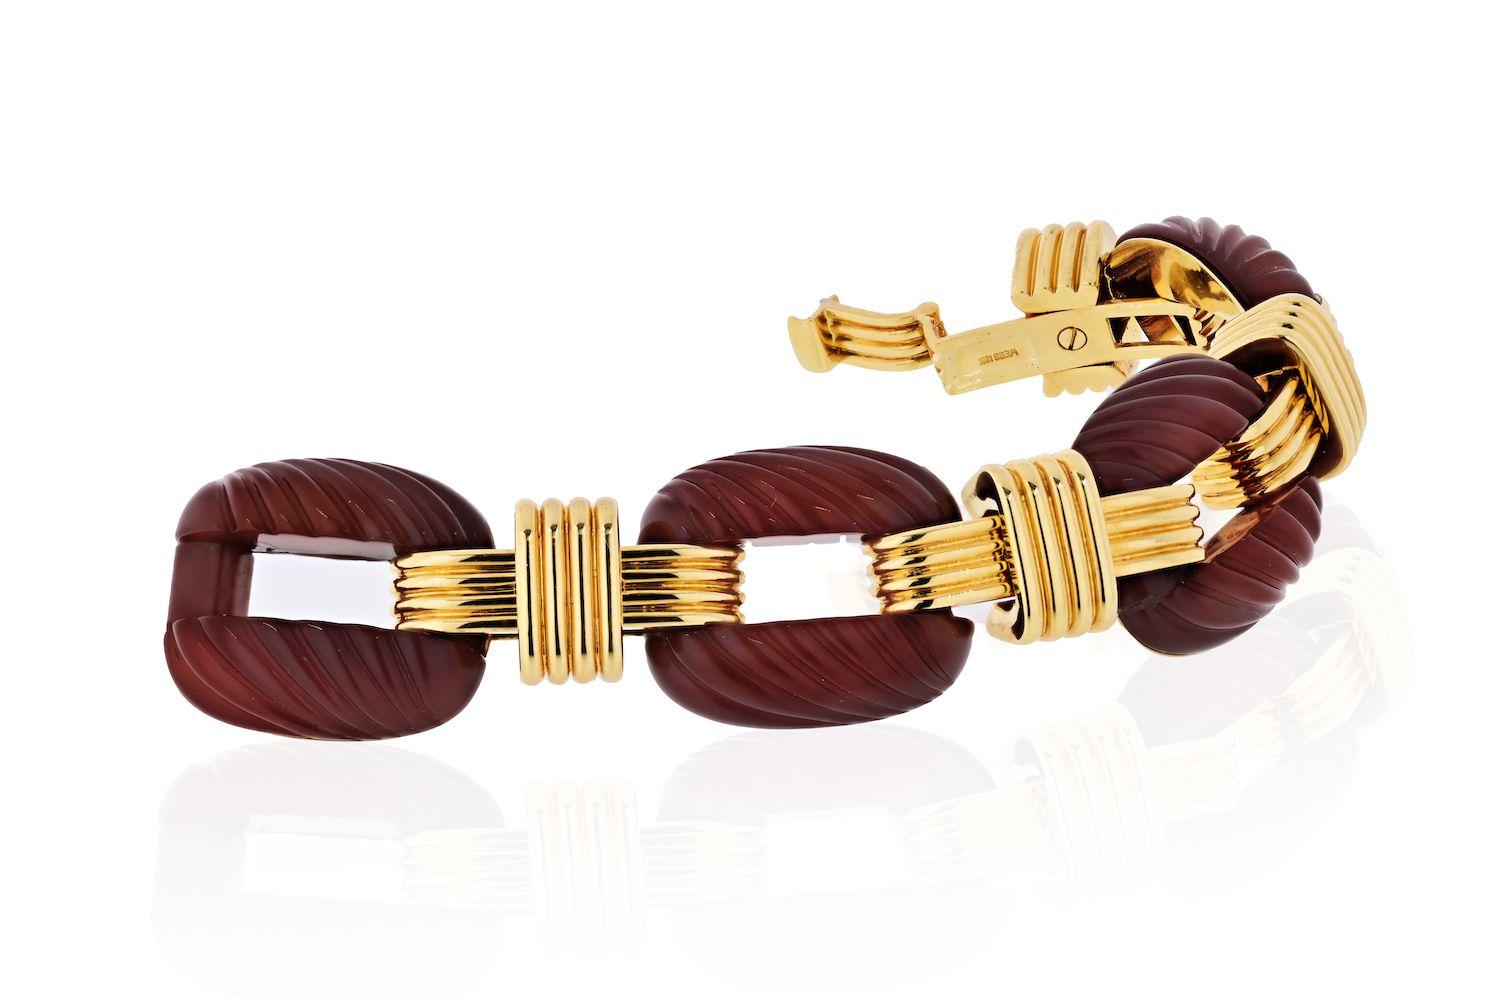 Important carnelian link bracelet by David Webb composed of cushion-shaped fluted carnelian, with open centers, bisected by wide ribbed gold bands
Excellent condition. Carnelian: deep reddish-brown, translucent, good luster.
7.5 inches long. 
